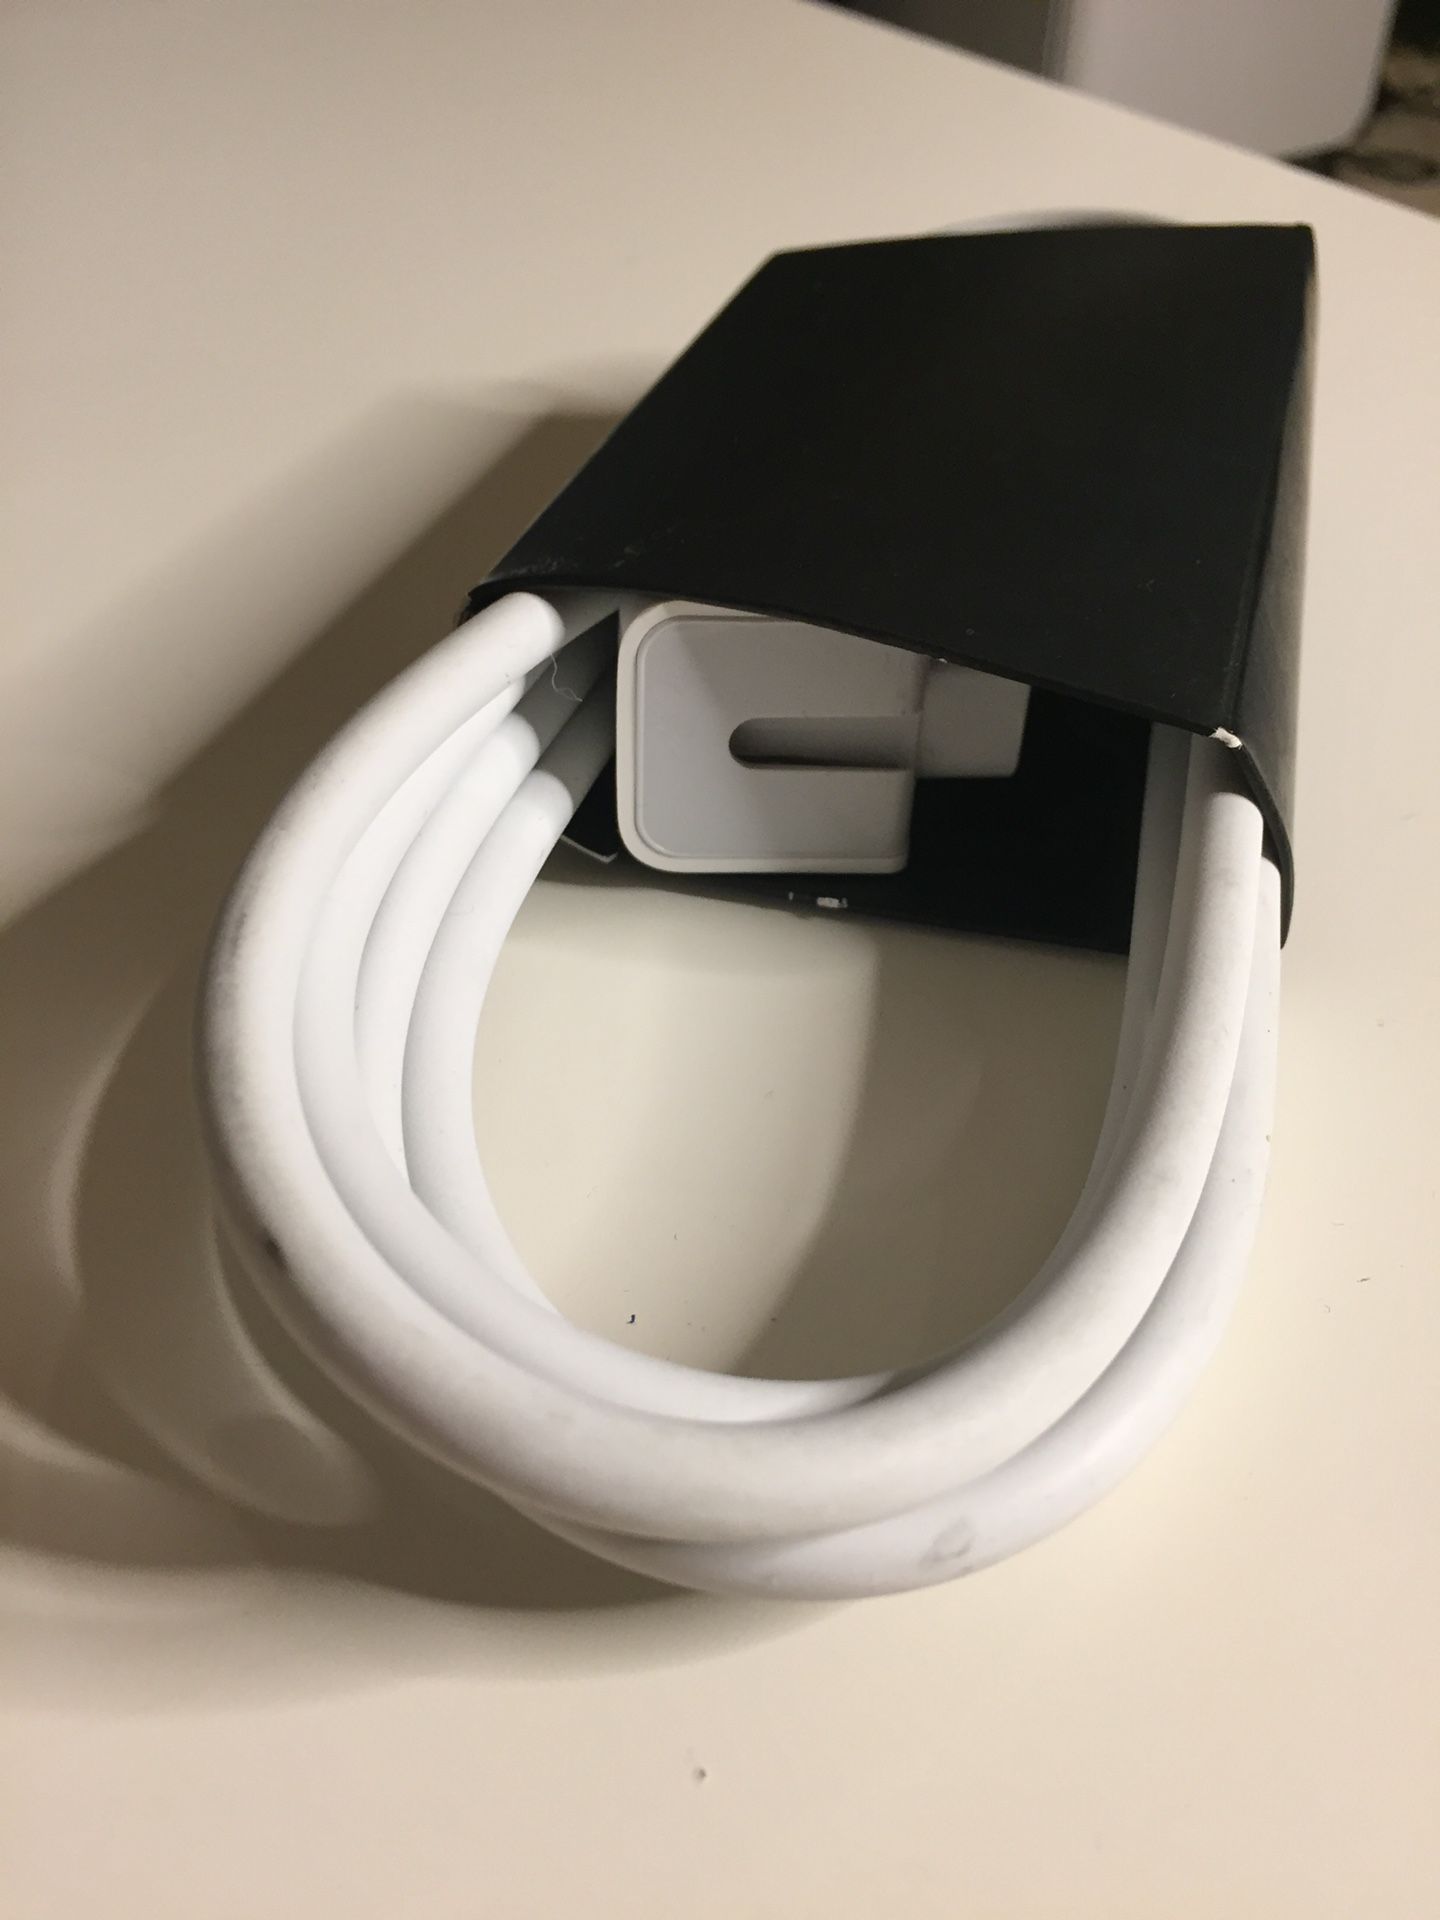 Apple charge cord.